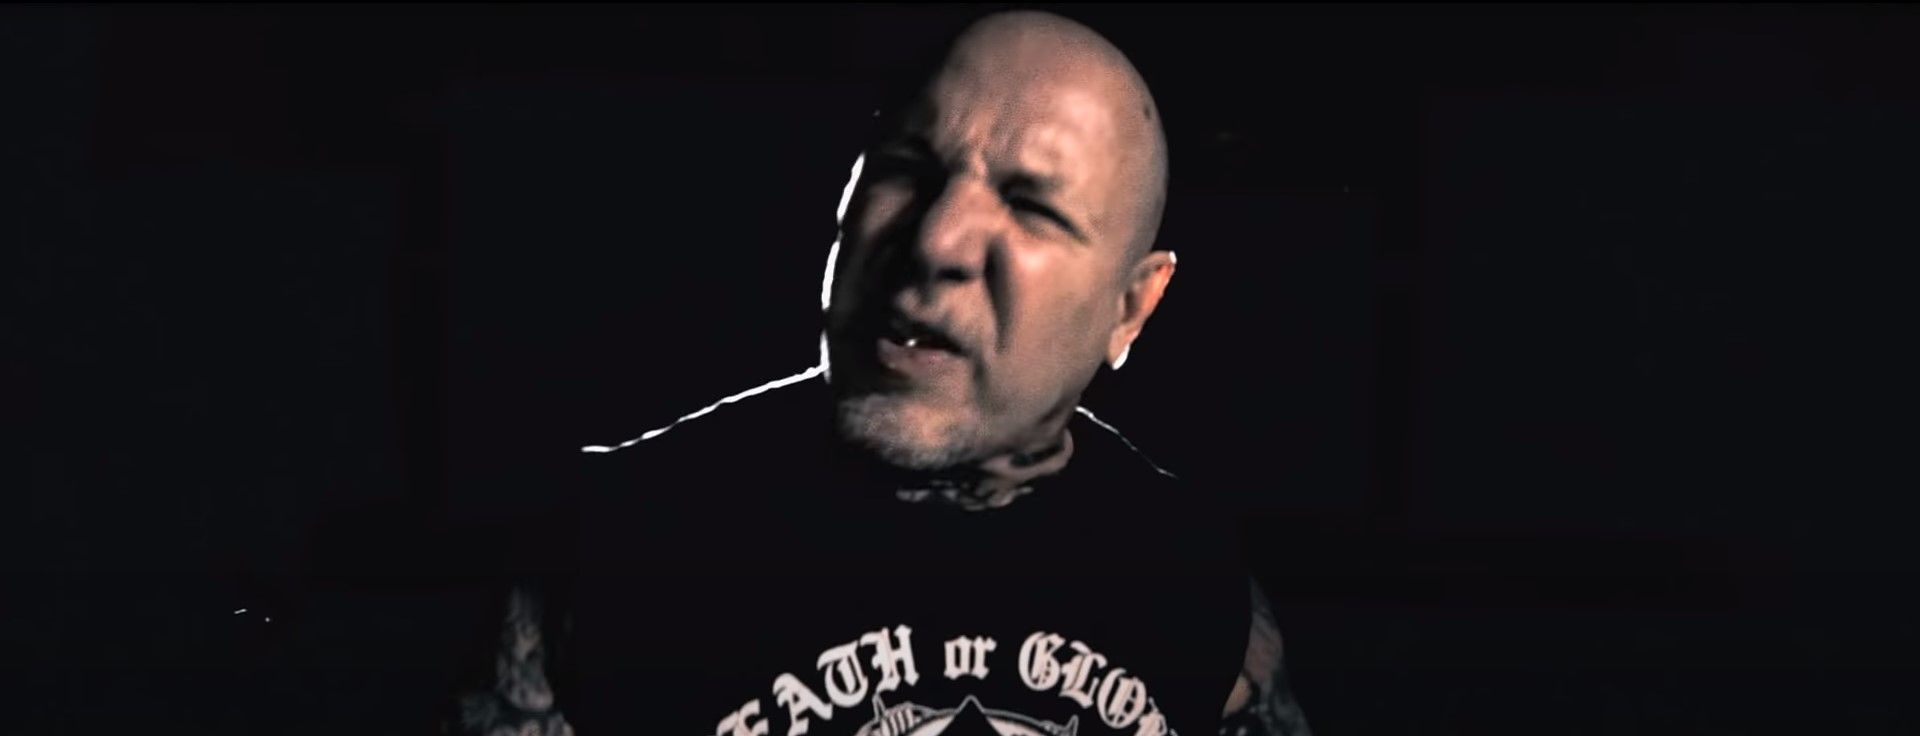 Agnostic Front - Urban Decay (Offciial)